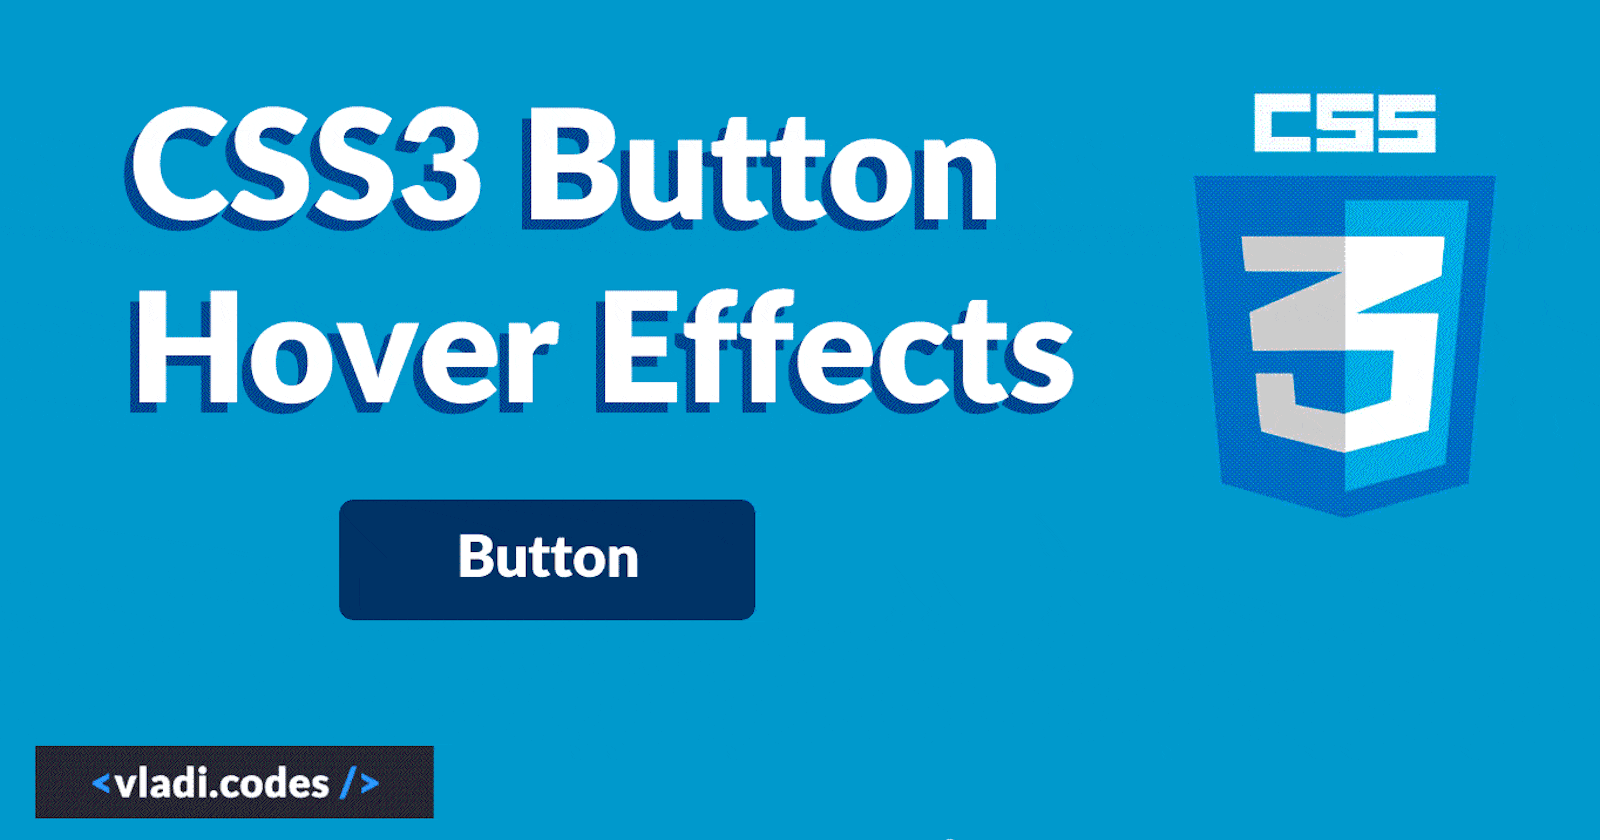 CSS3 Tricks - Hover button effects